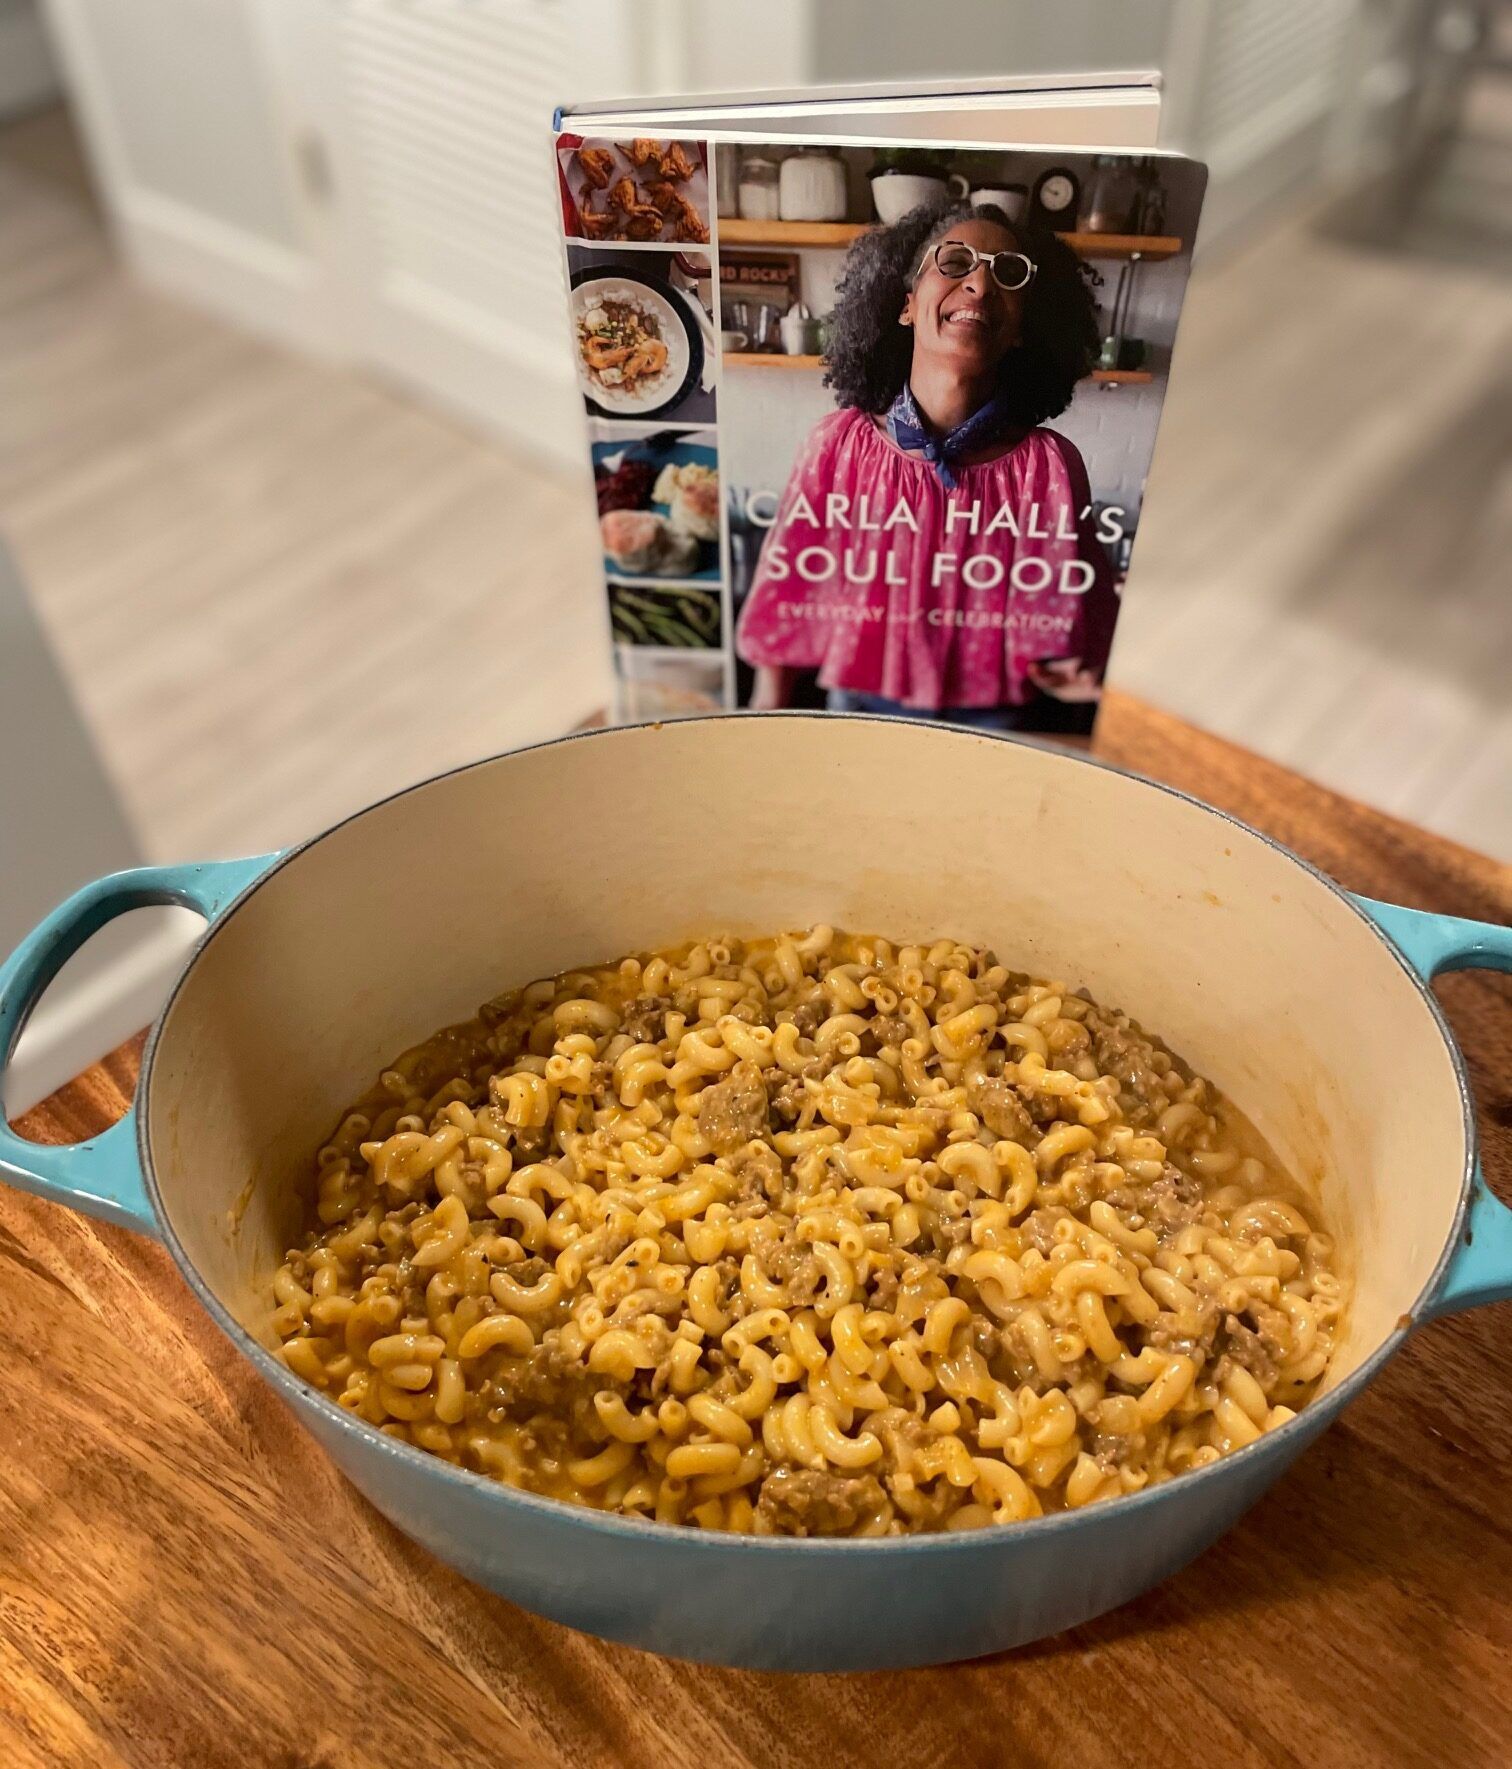 A teal dutch oven with a beefy mac and cheese inside, on a wooden table in front of the cookbook Carla Hall's Soul Food